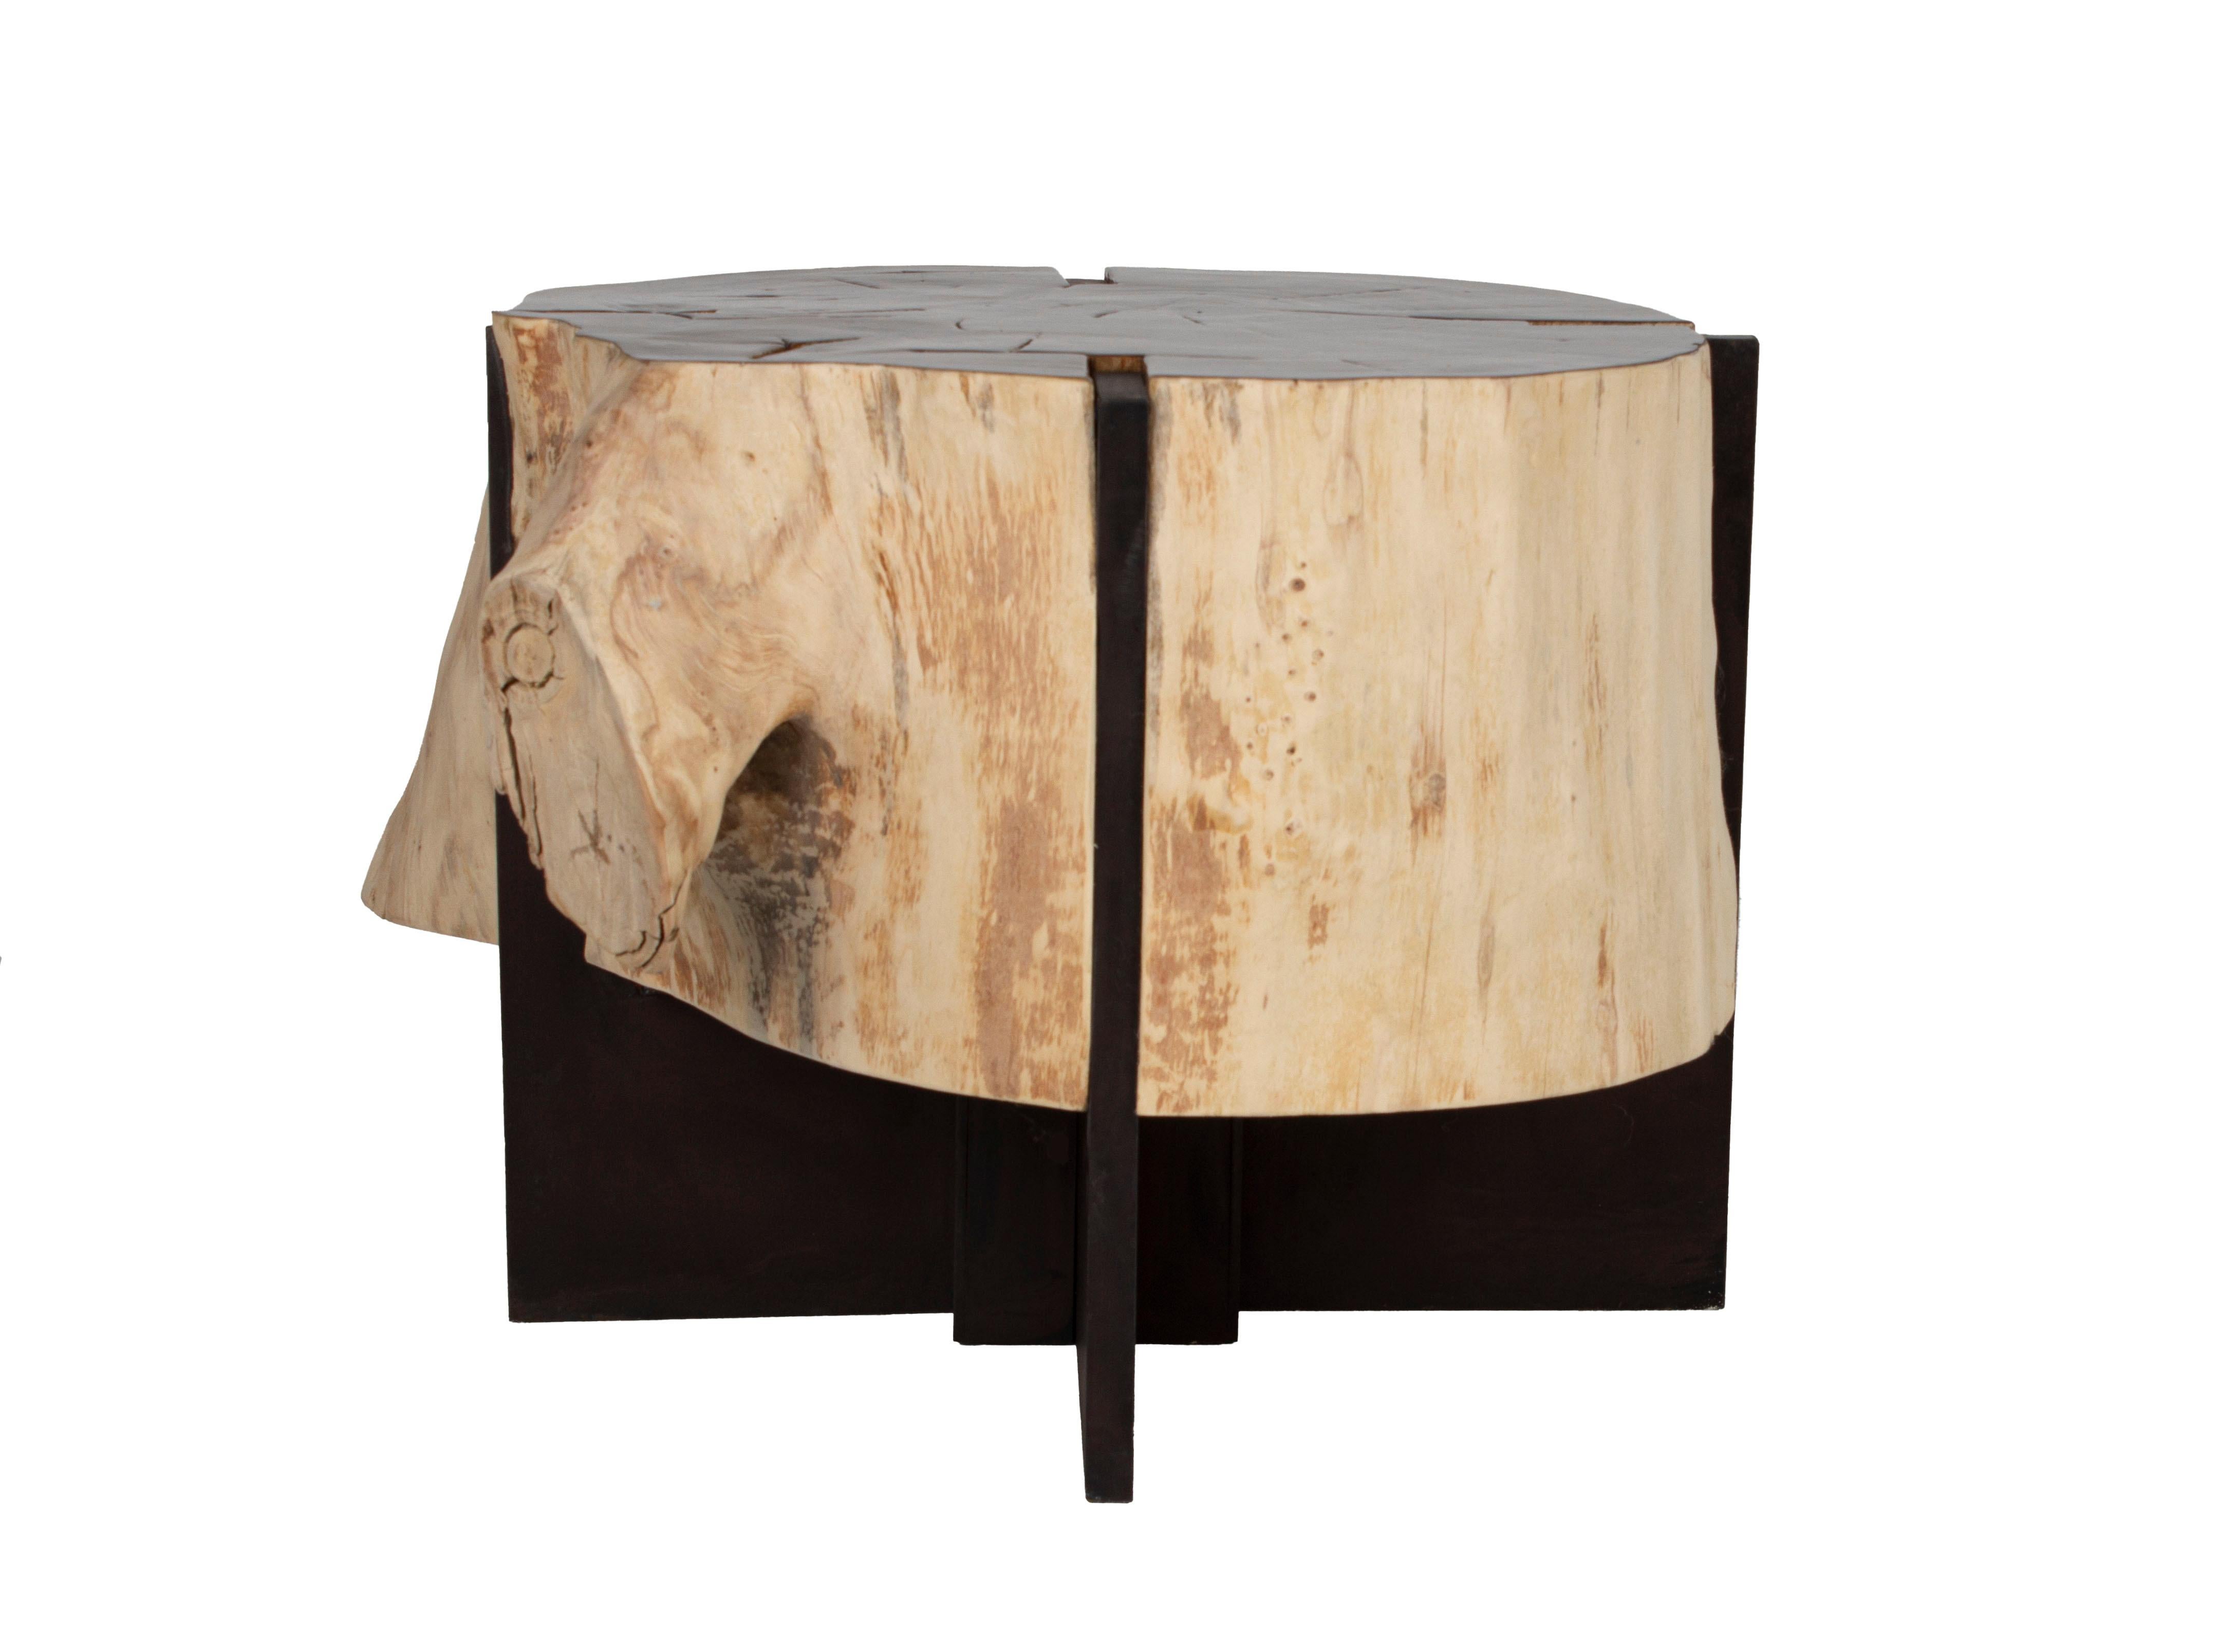 Organic form oak side table Medici gardens Florence, Italy

One of a kind piece. From Italy, sold from Dallas, TX

Measures: 19